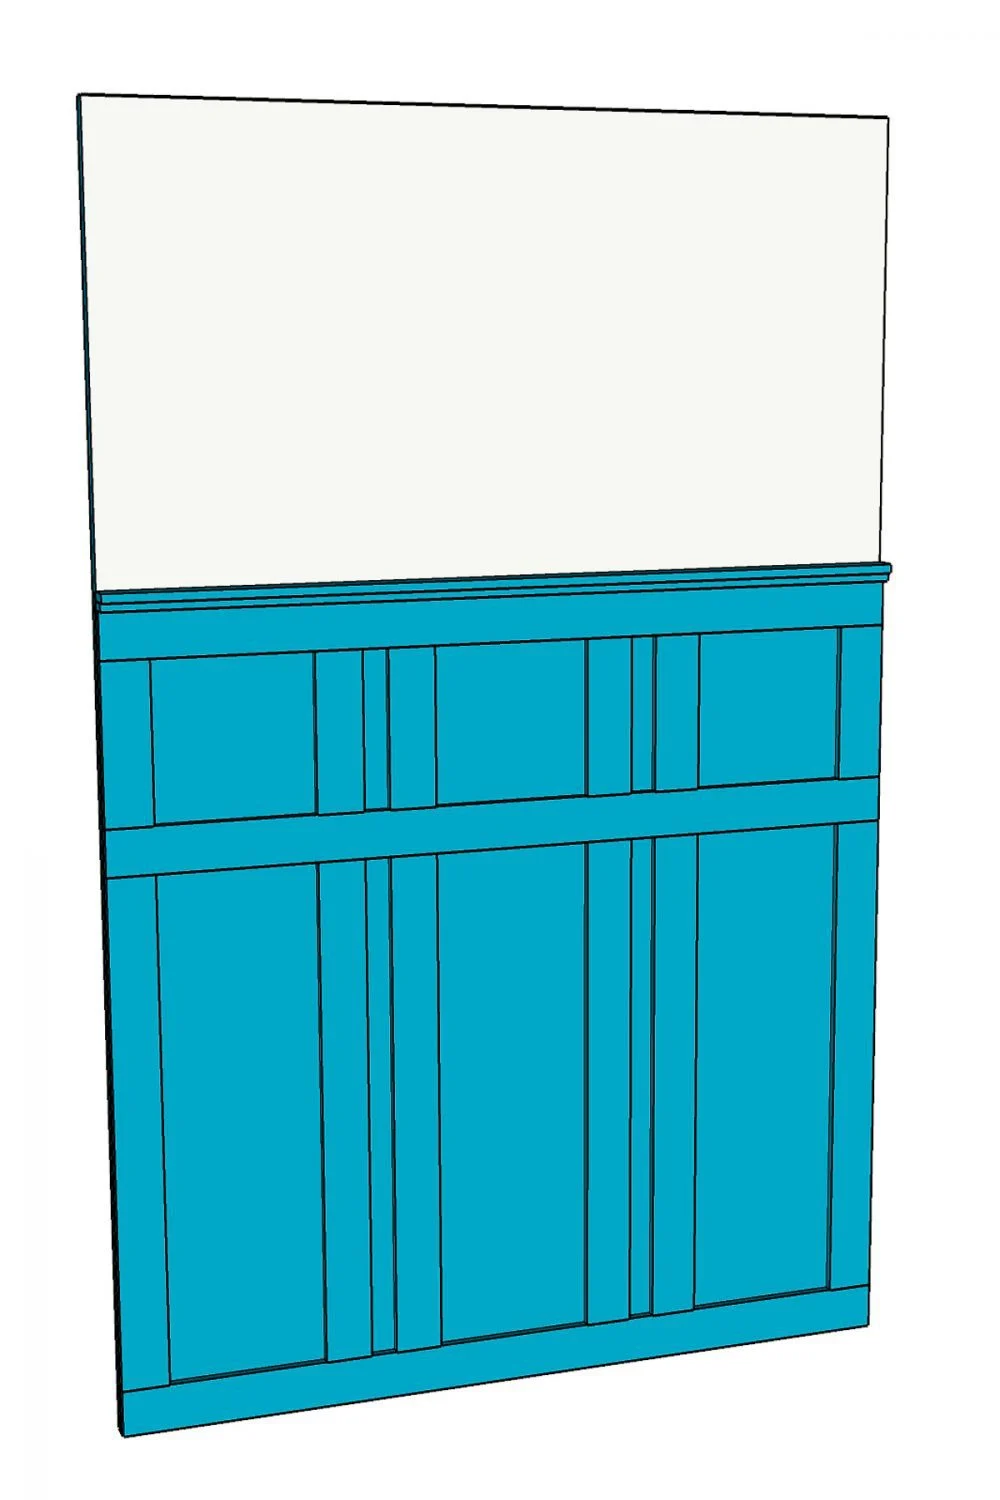 3D SketchUp drawing of the wall behind the door with board and batten painted blue on it. 